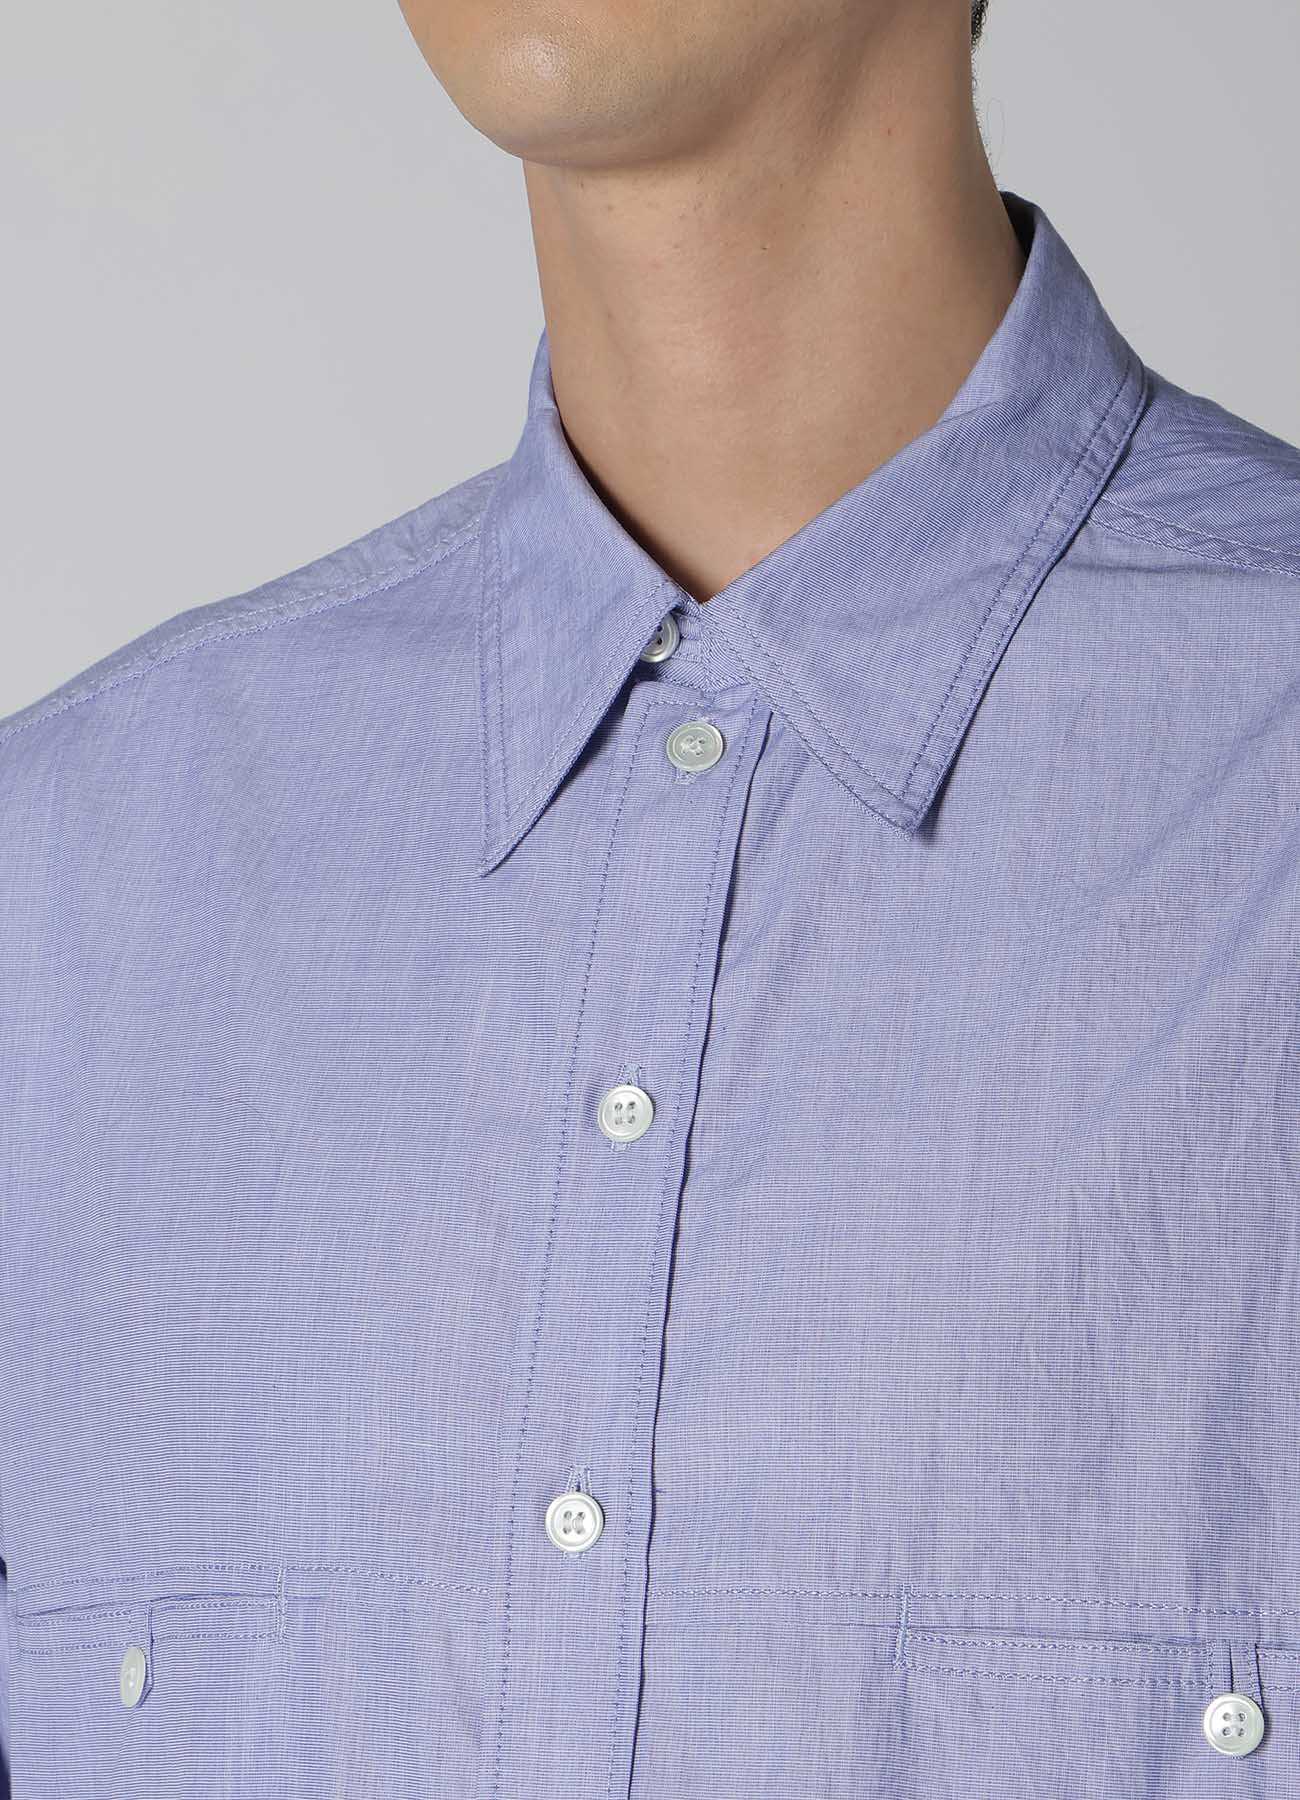 CHAIN STITCHED SHIRT WITH FRONT PANEL